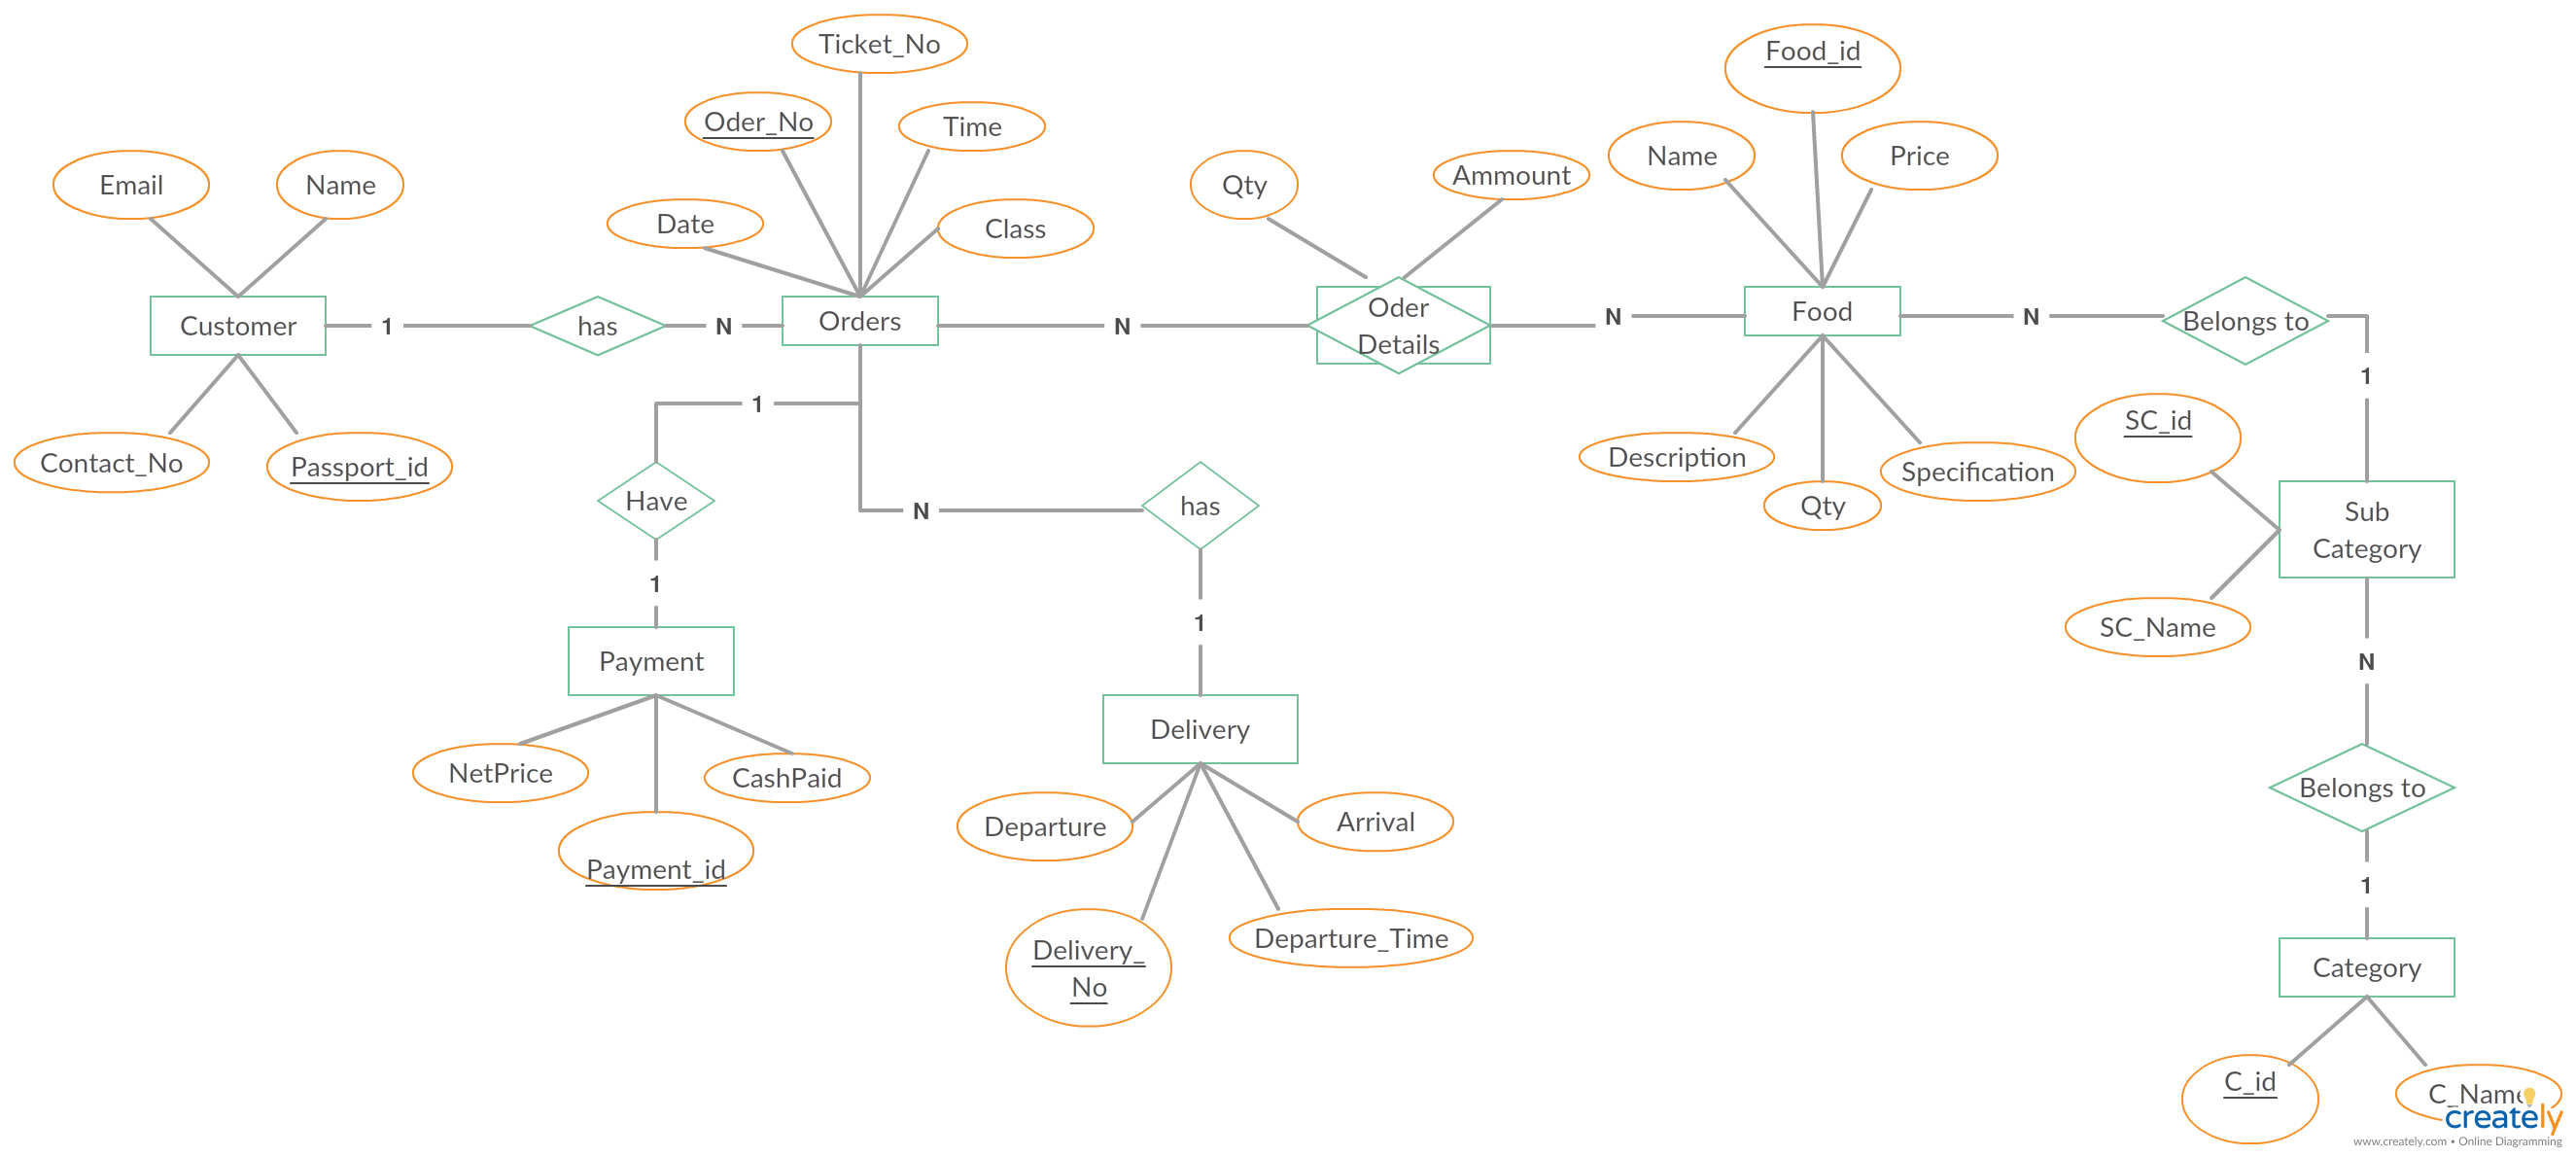 A Entity Relationship Diagram Showing Food Ordering System. Ideal within Entity Relationship Diagram Examples Database Design Pdf